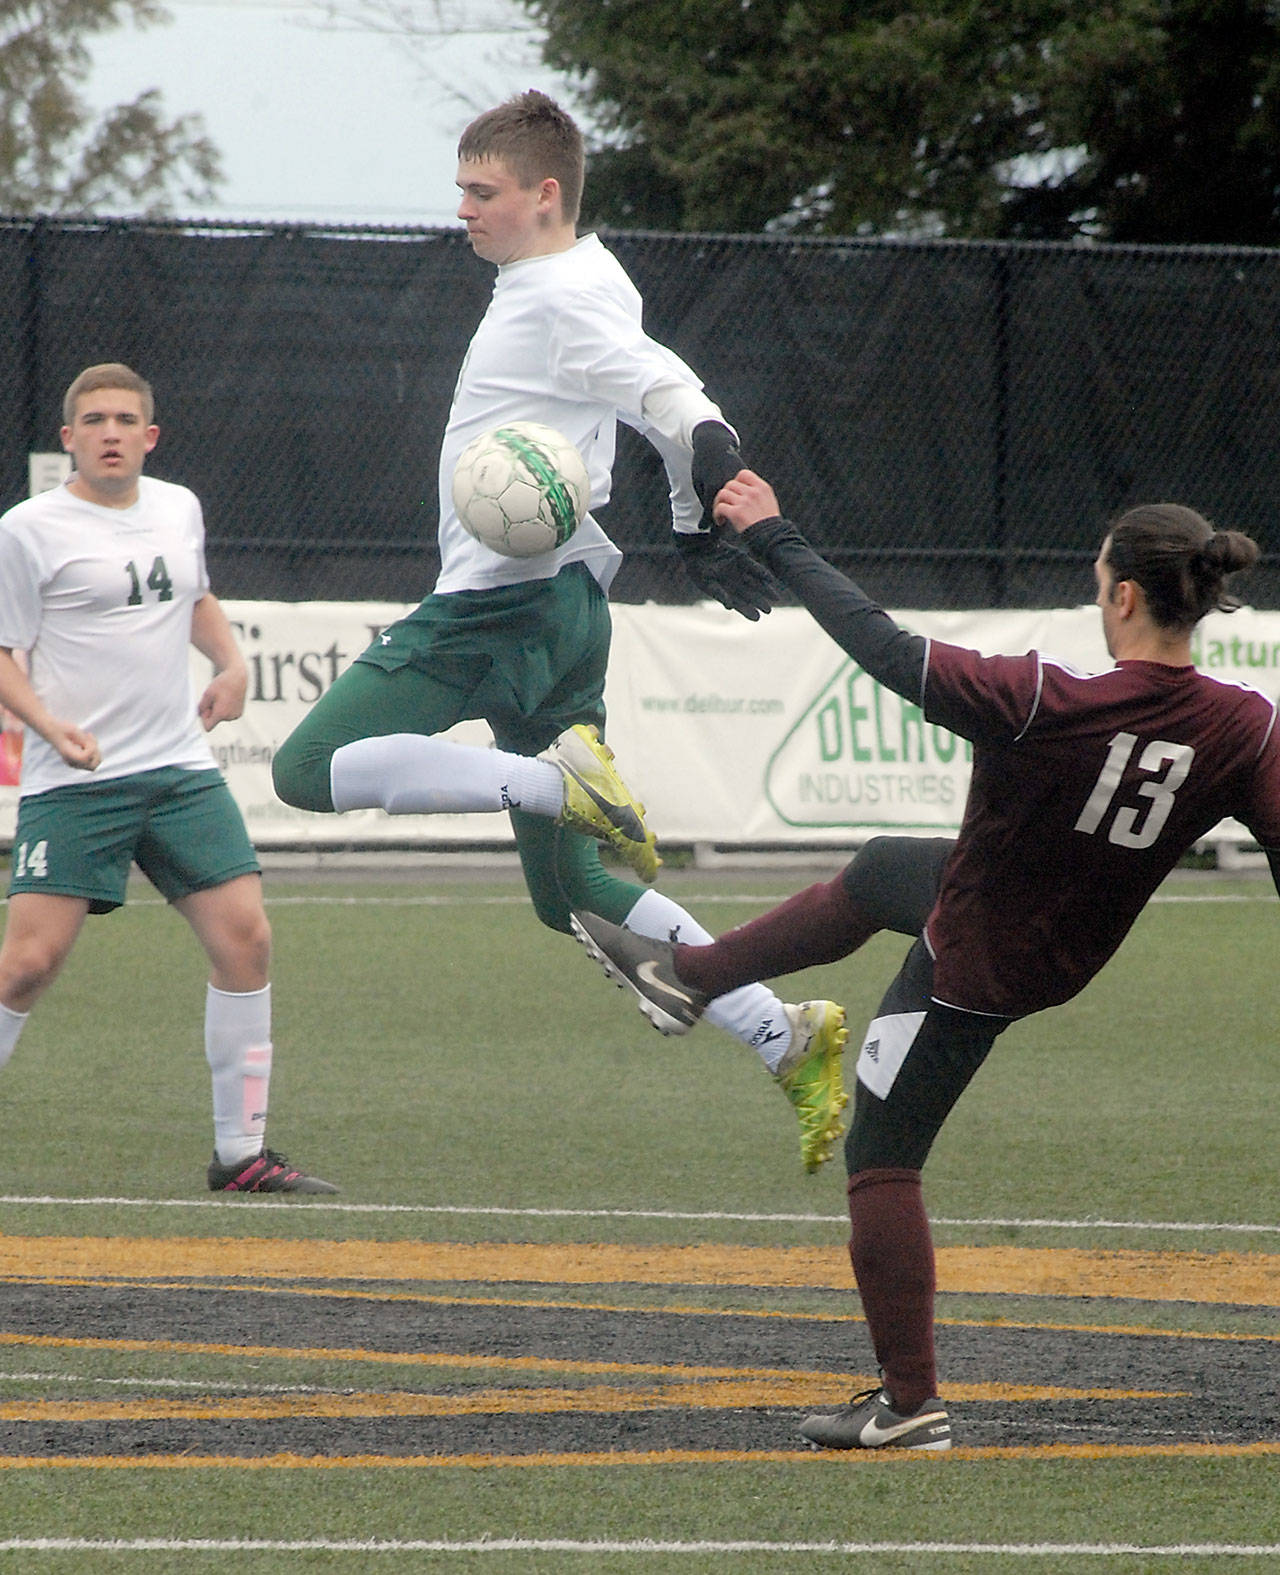 Keith Thorpe/Peninsula Daily News Port Angeles’ Michael Scott, center, leaps high to block a pass by Ketchikan’s Giovaniu Covelli as Scott’s teammate, Karsten Hertzog, left, looks on during Saturday’s nonleague matchup at Peninsula College in Port Angeles.